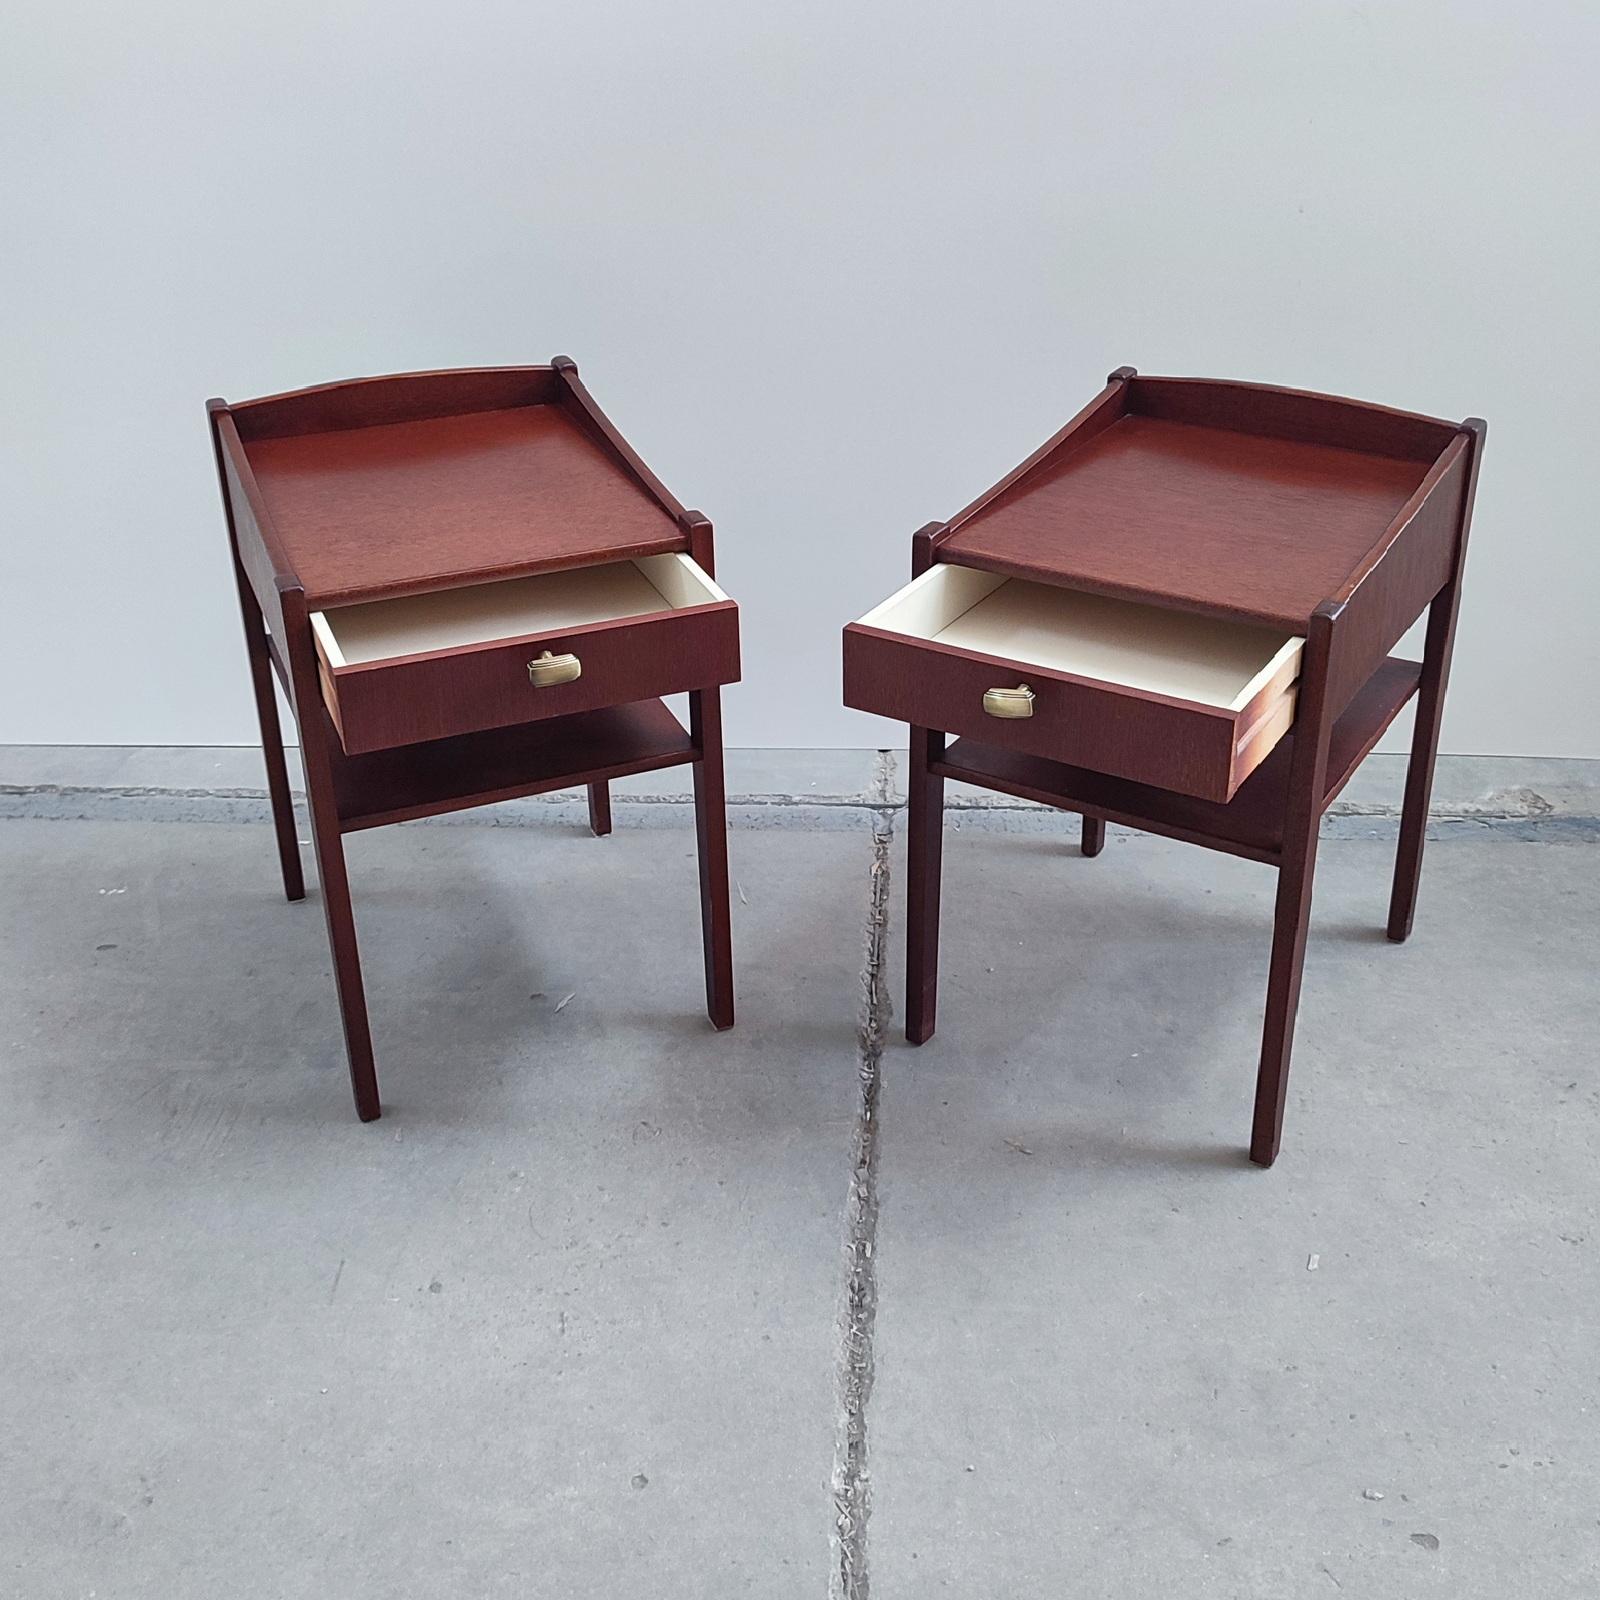 Pair of Mid-century Swedish Mahogany Nightstands, Bedside Tables, 1960s For Sale 1